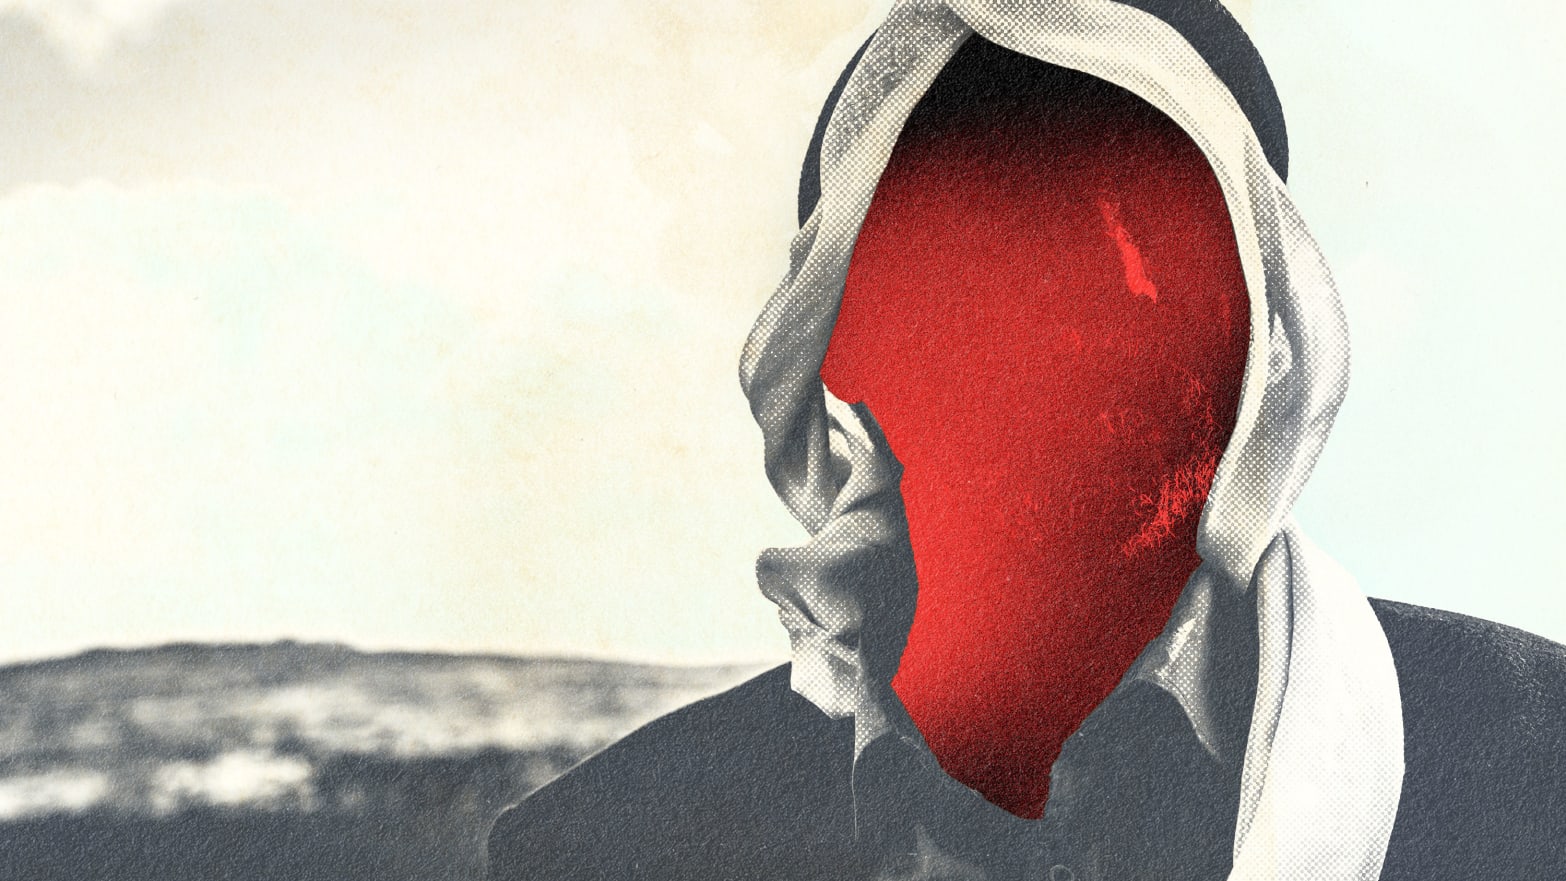 A photo illustration of a Palestinian man in black and white with a red and black shroud  across his face.